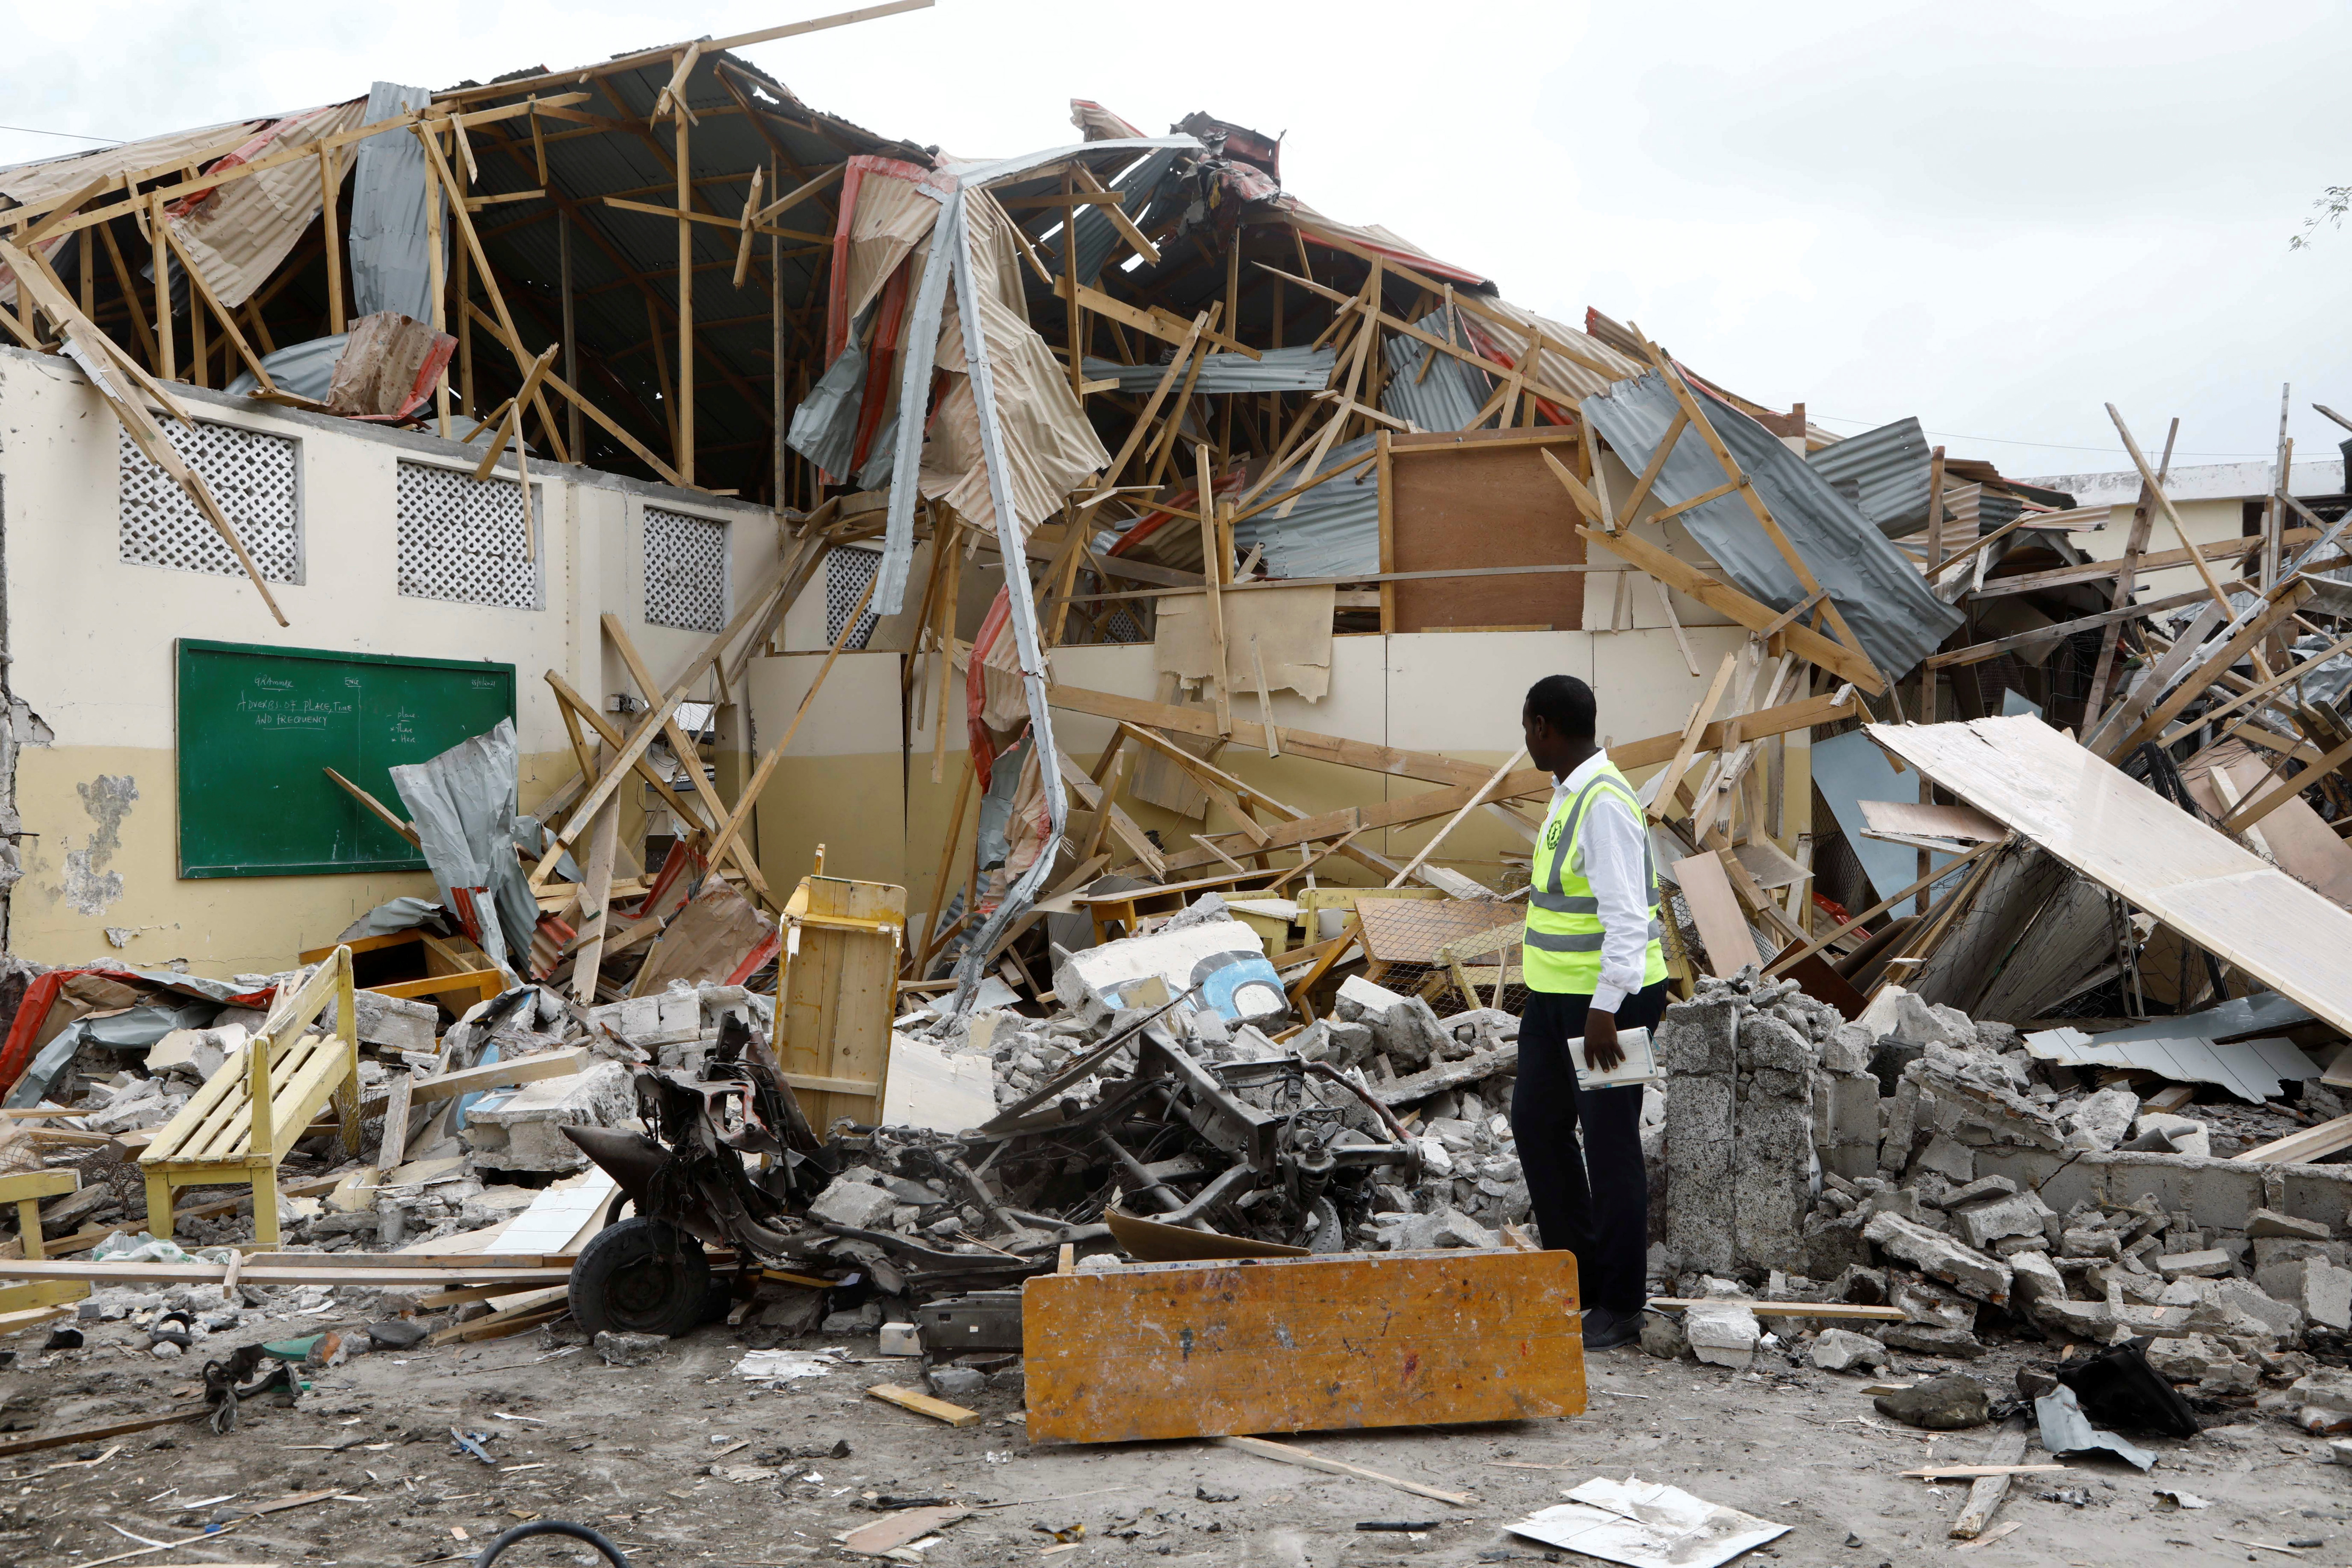 A policeman looks through the debris of a classroom after a car exploded in a suicide attack near Mucassar primary and secondary school in Hodan district of Mogadishu